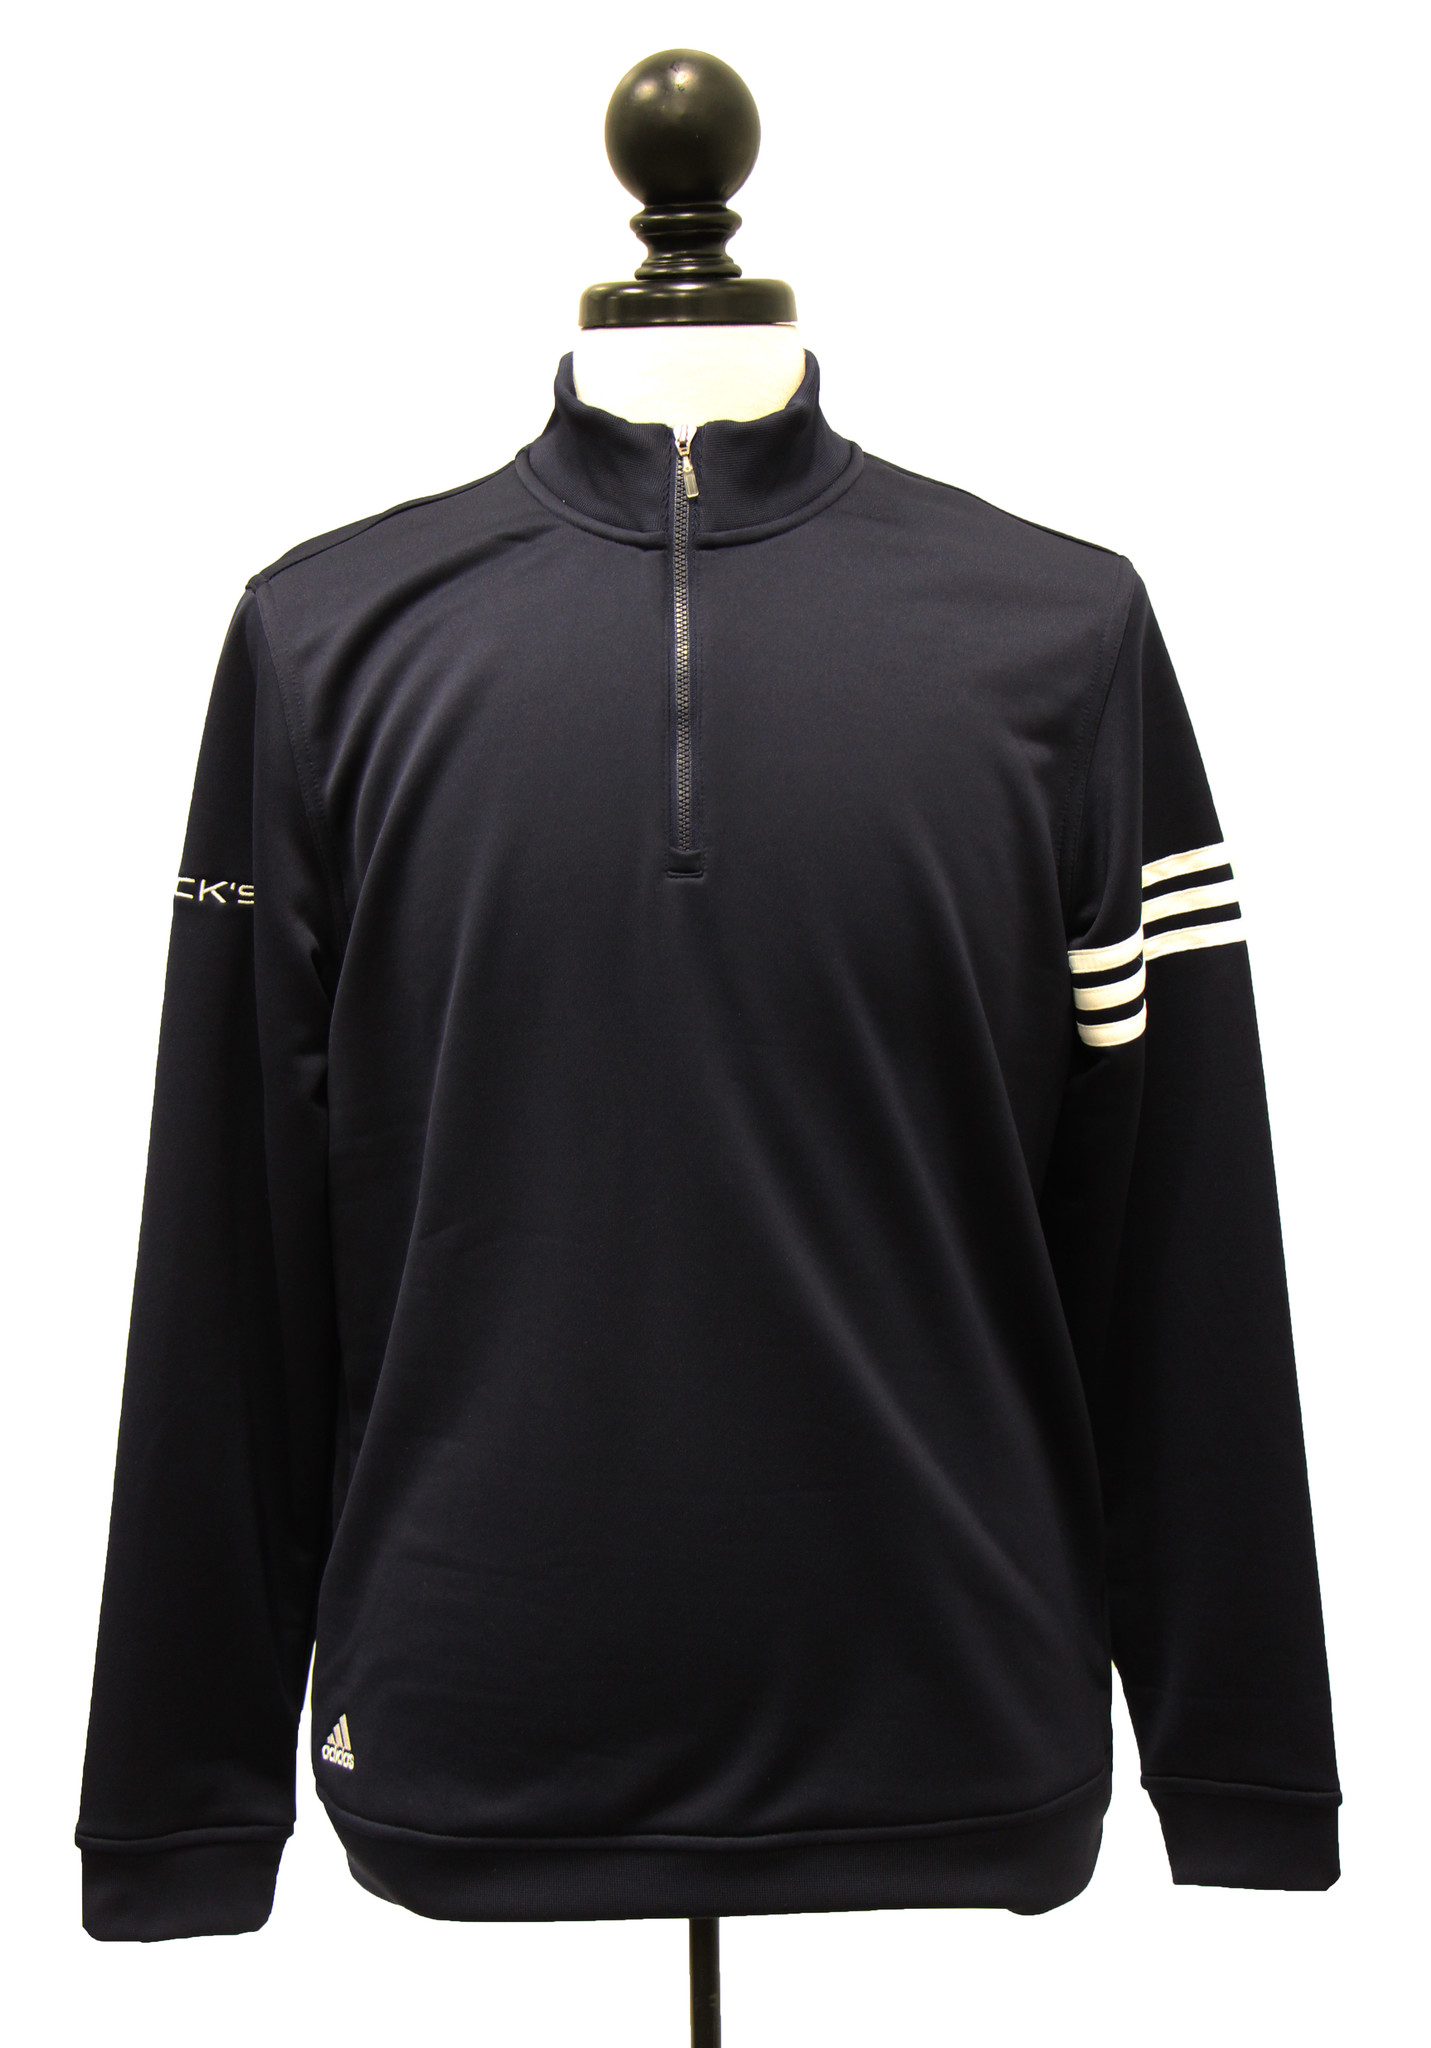 Colonial tofu Limpiamente Men's Adidas ClimaLite French Terry 1/4 Zip - Beck's Country Store